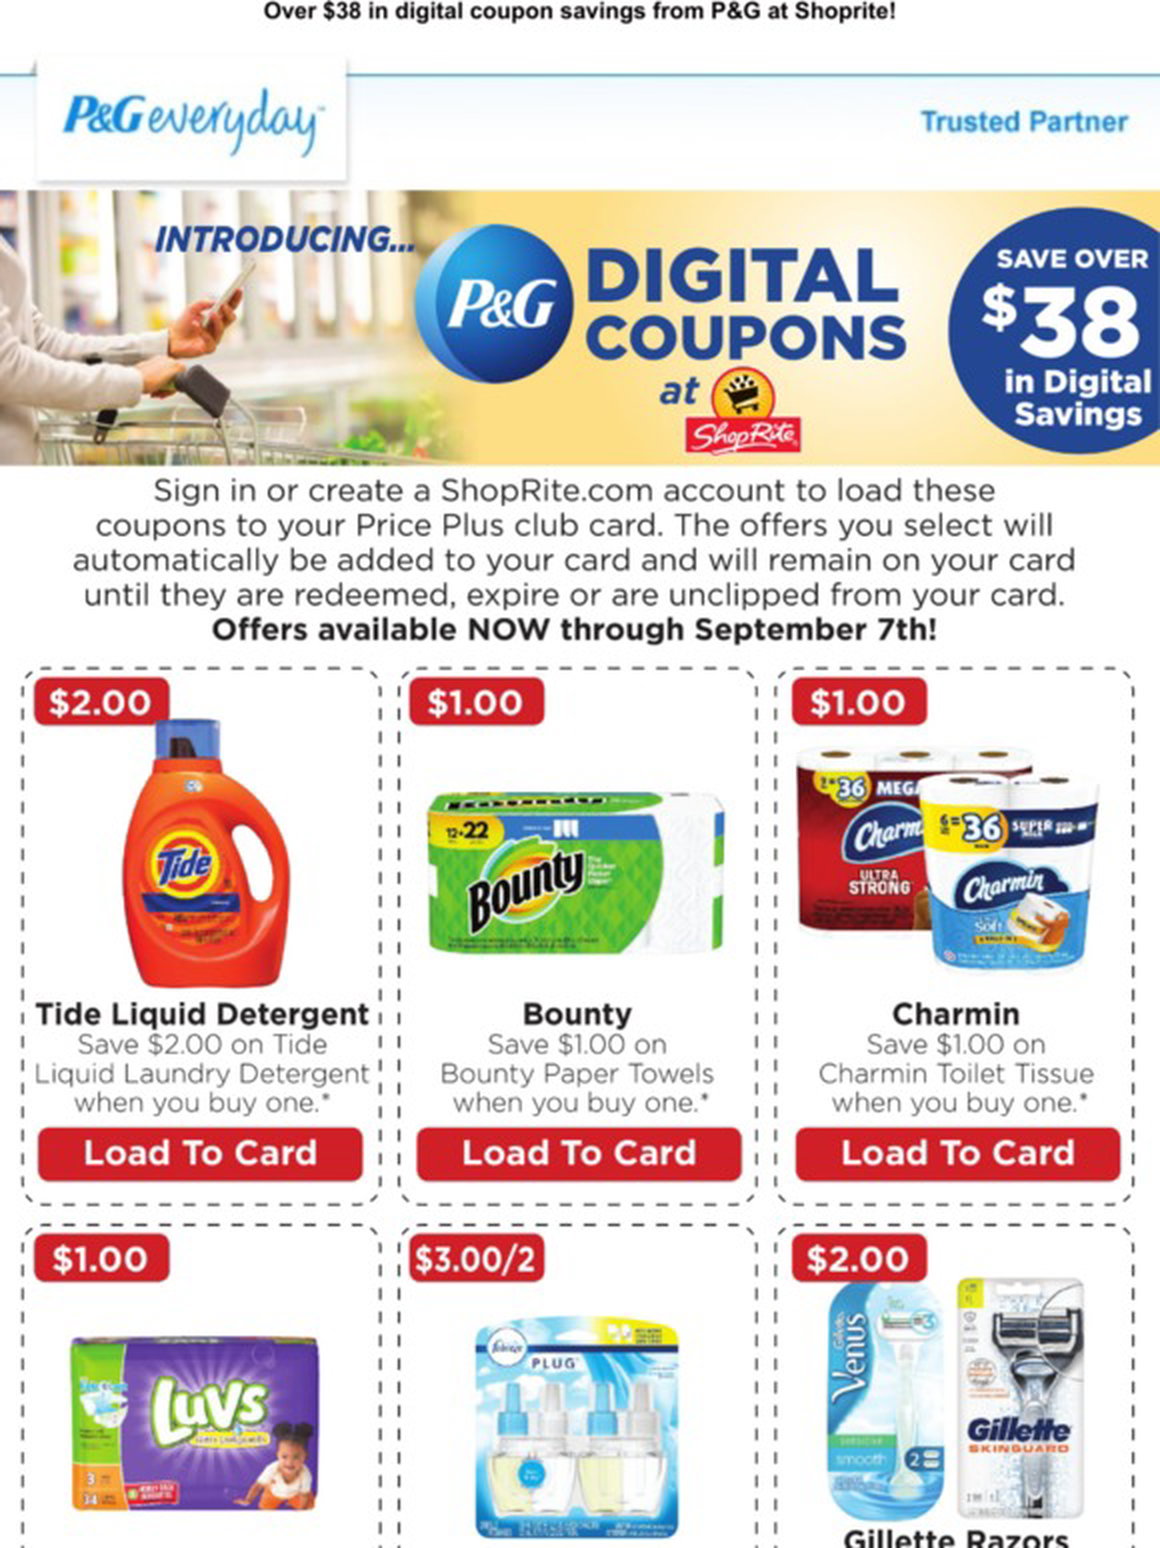 P G Everyday Over 38 In Digital Coupon Savings At Shoprite From P G 